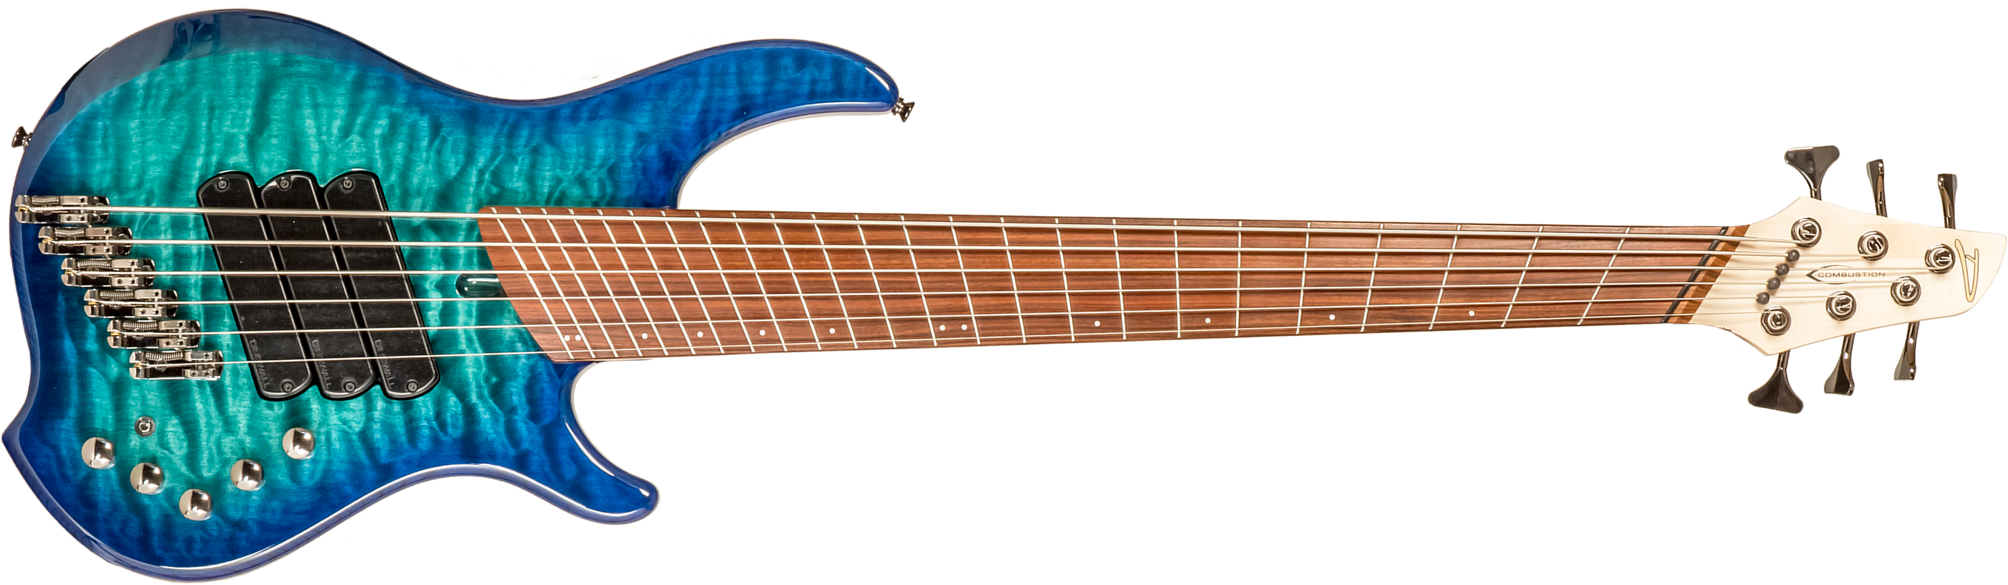 Dingwall Combustion Cb3 6c 3pu Active Pf - Whalepool Burst - Solid body electric bass - Main picture